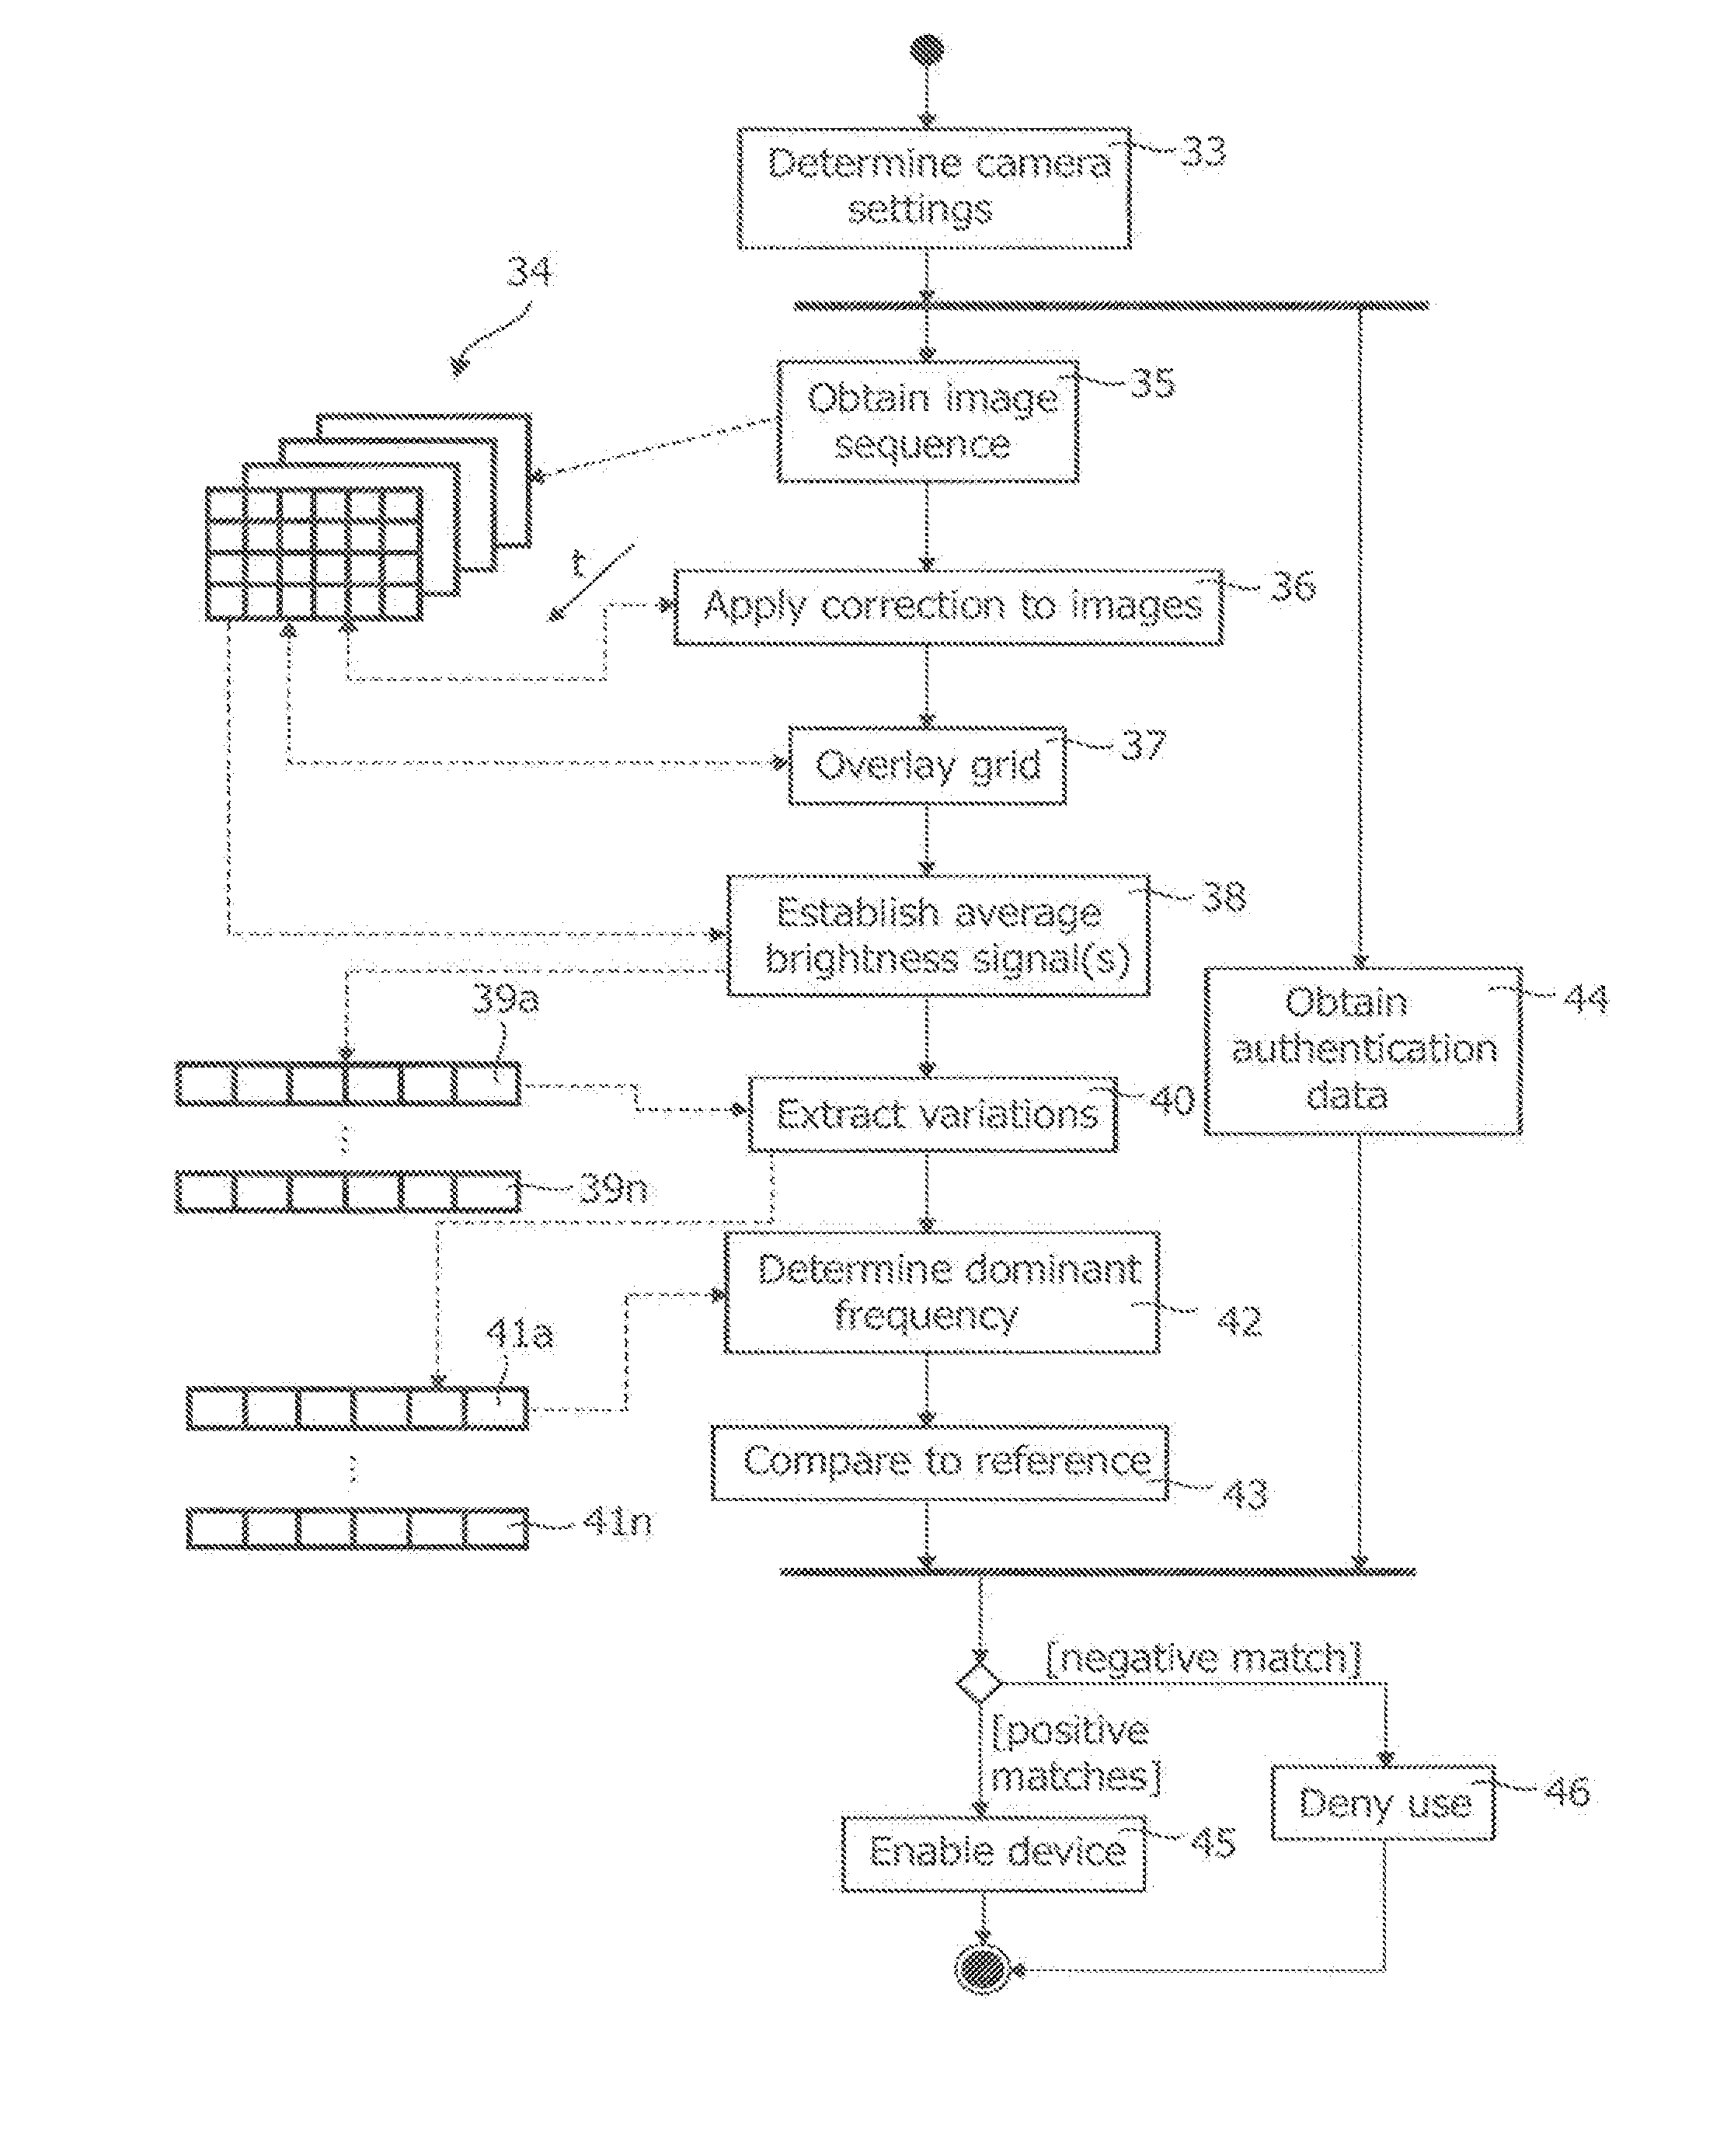 Method of controlling a function of a device and system for detecting the presence of a living being